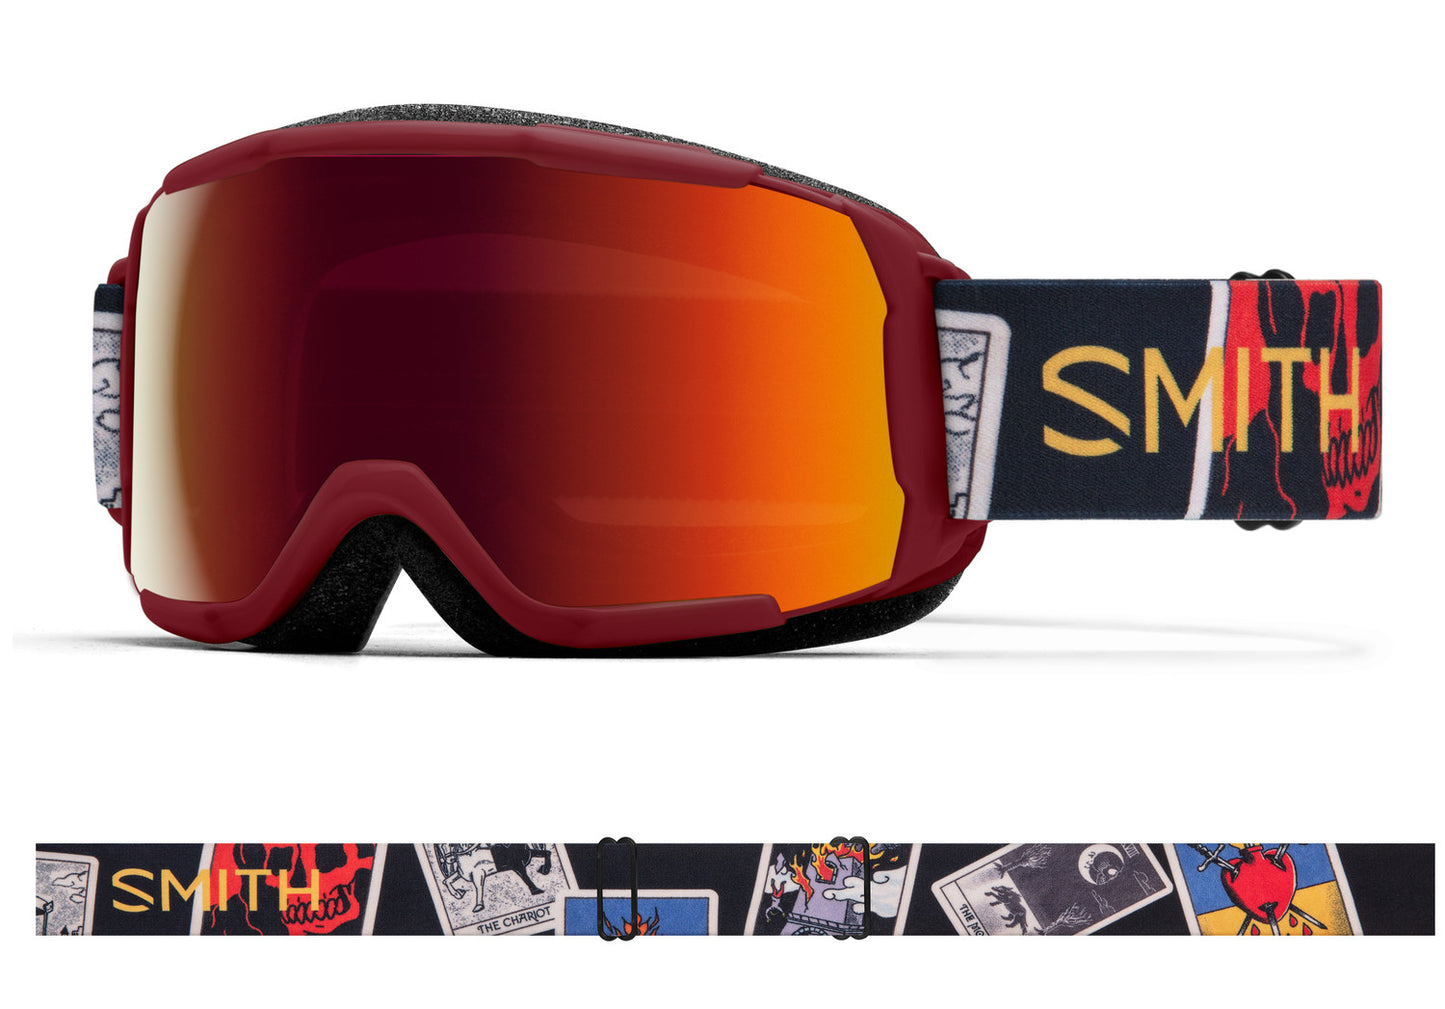 Smith Kids' Grom Snow Goggle Sangria Fortune Teller / Red Sol-X Mirror Snow Goggles